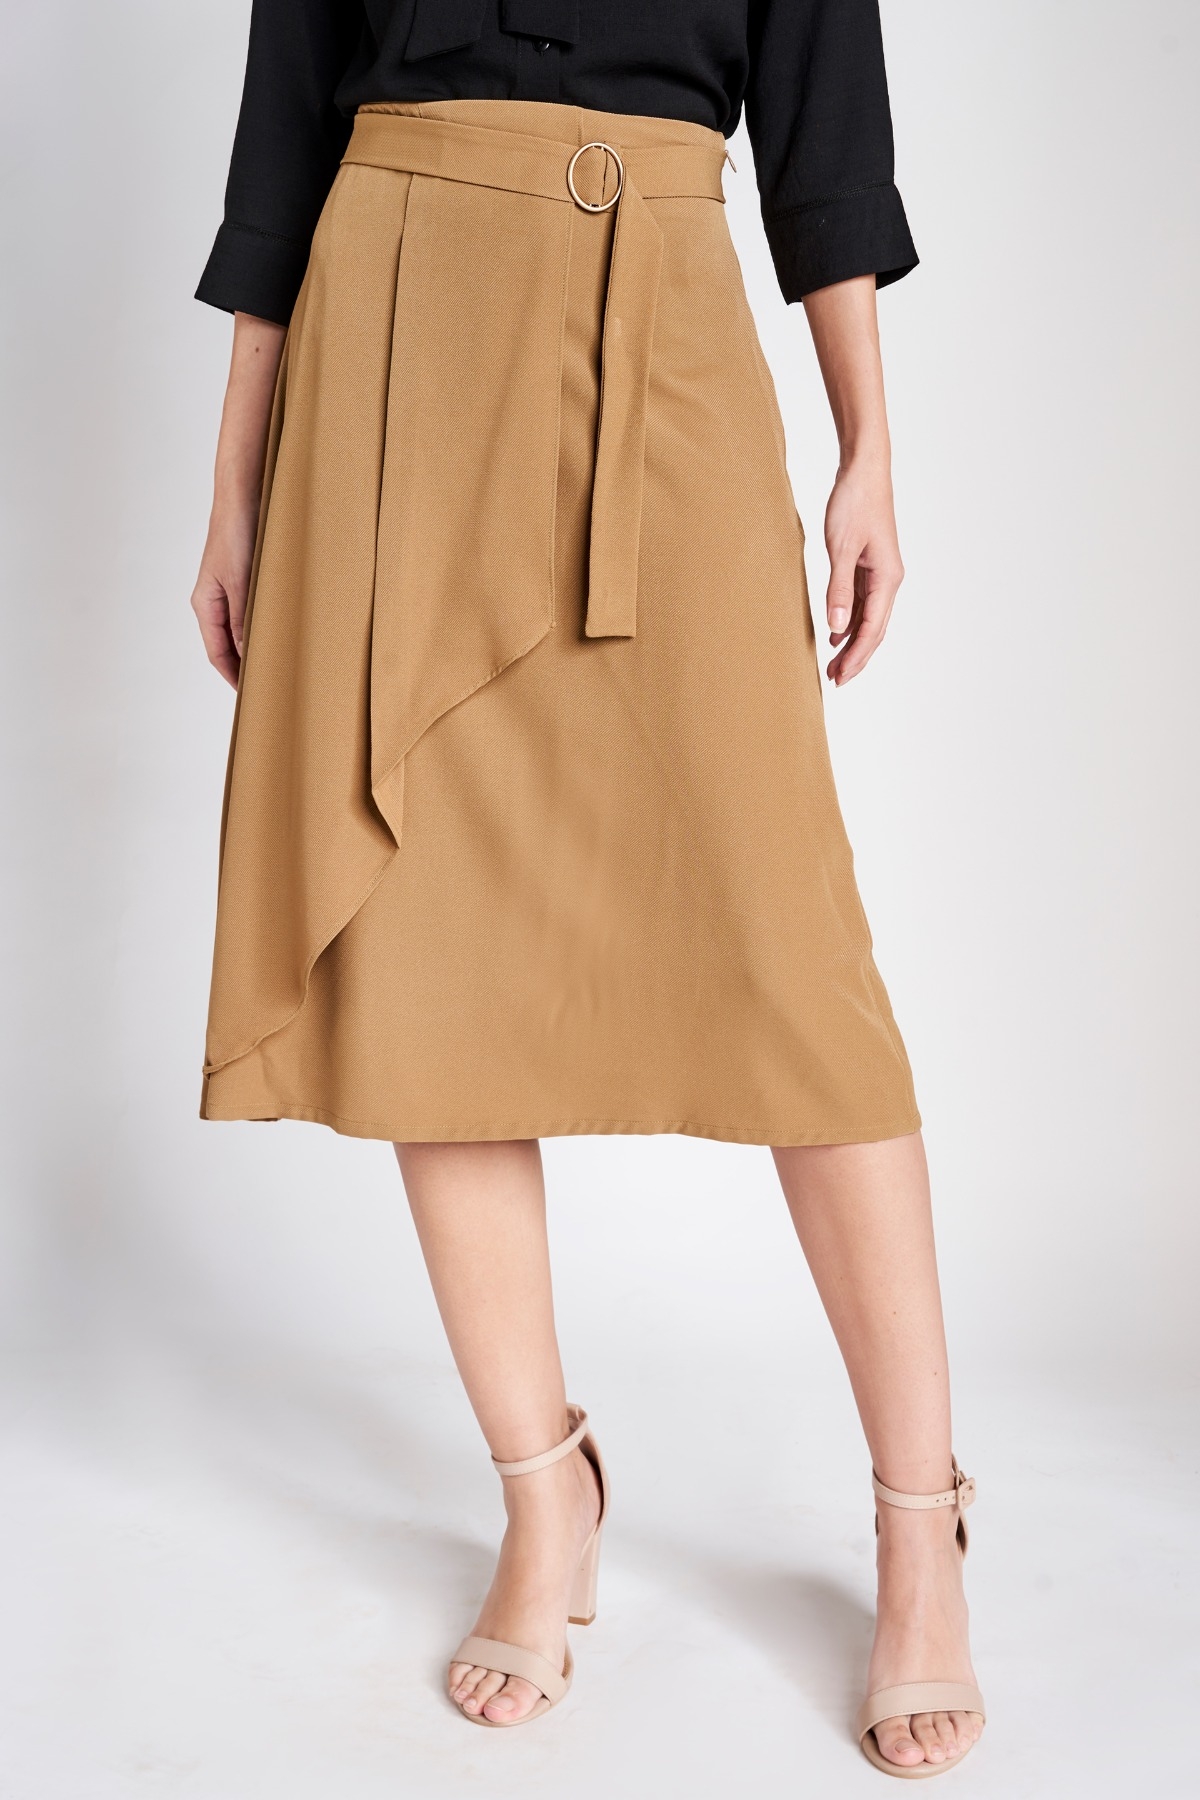 AND | AND BEIGE SKIRT